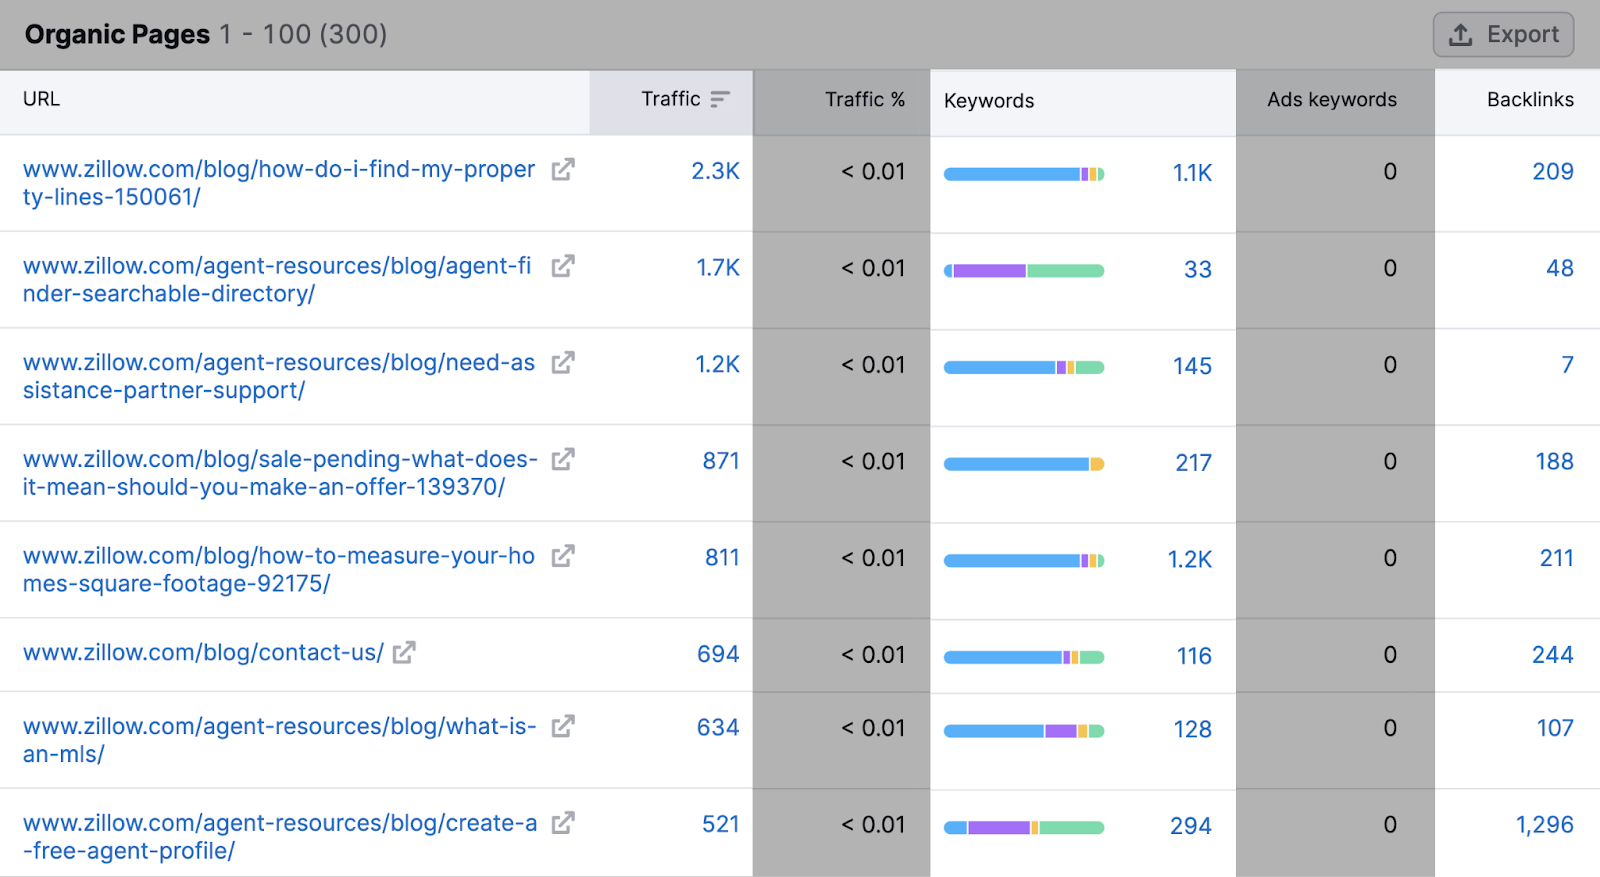 "Traffic" "Keywords" and "Backlinks" metrics highlighted in results